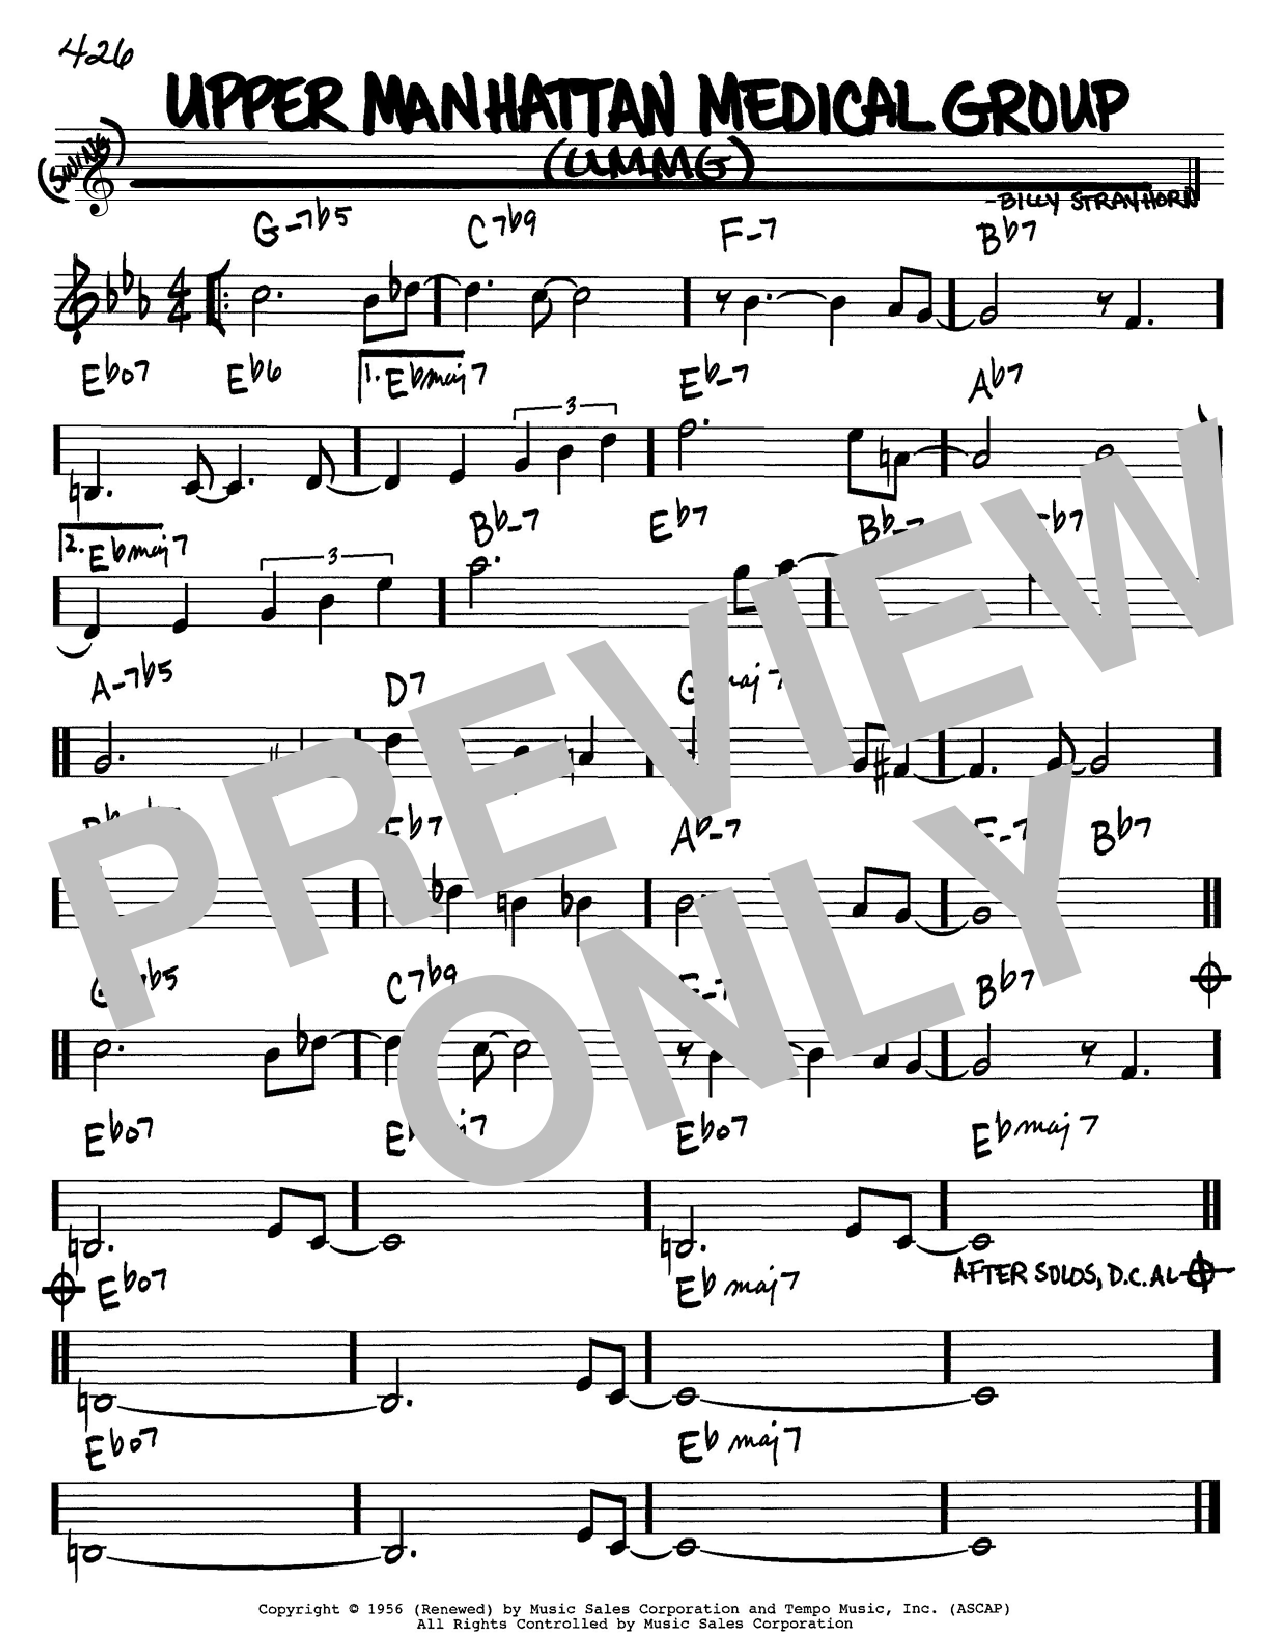 Billy Strayhorn Upper Manhattan Medical Group (UMMG) sheet music notes and chords. Download Printable PDF.